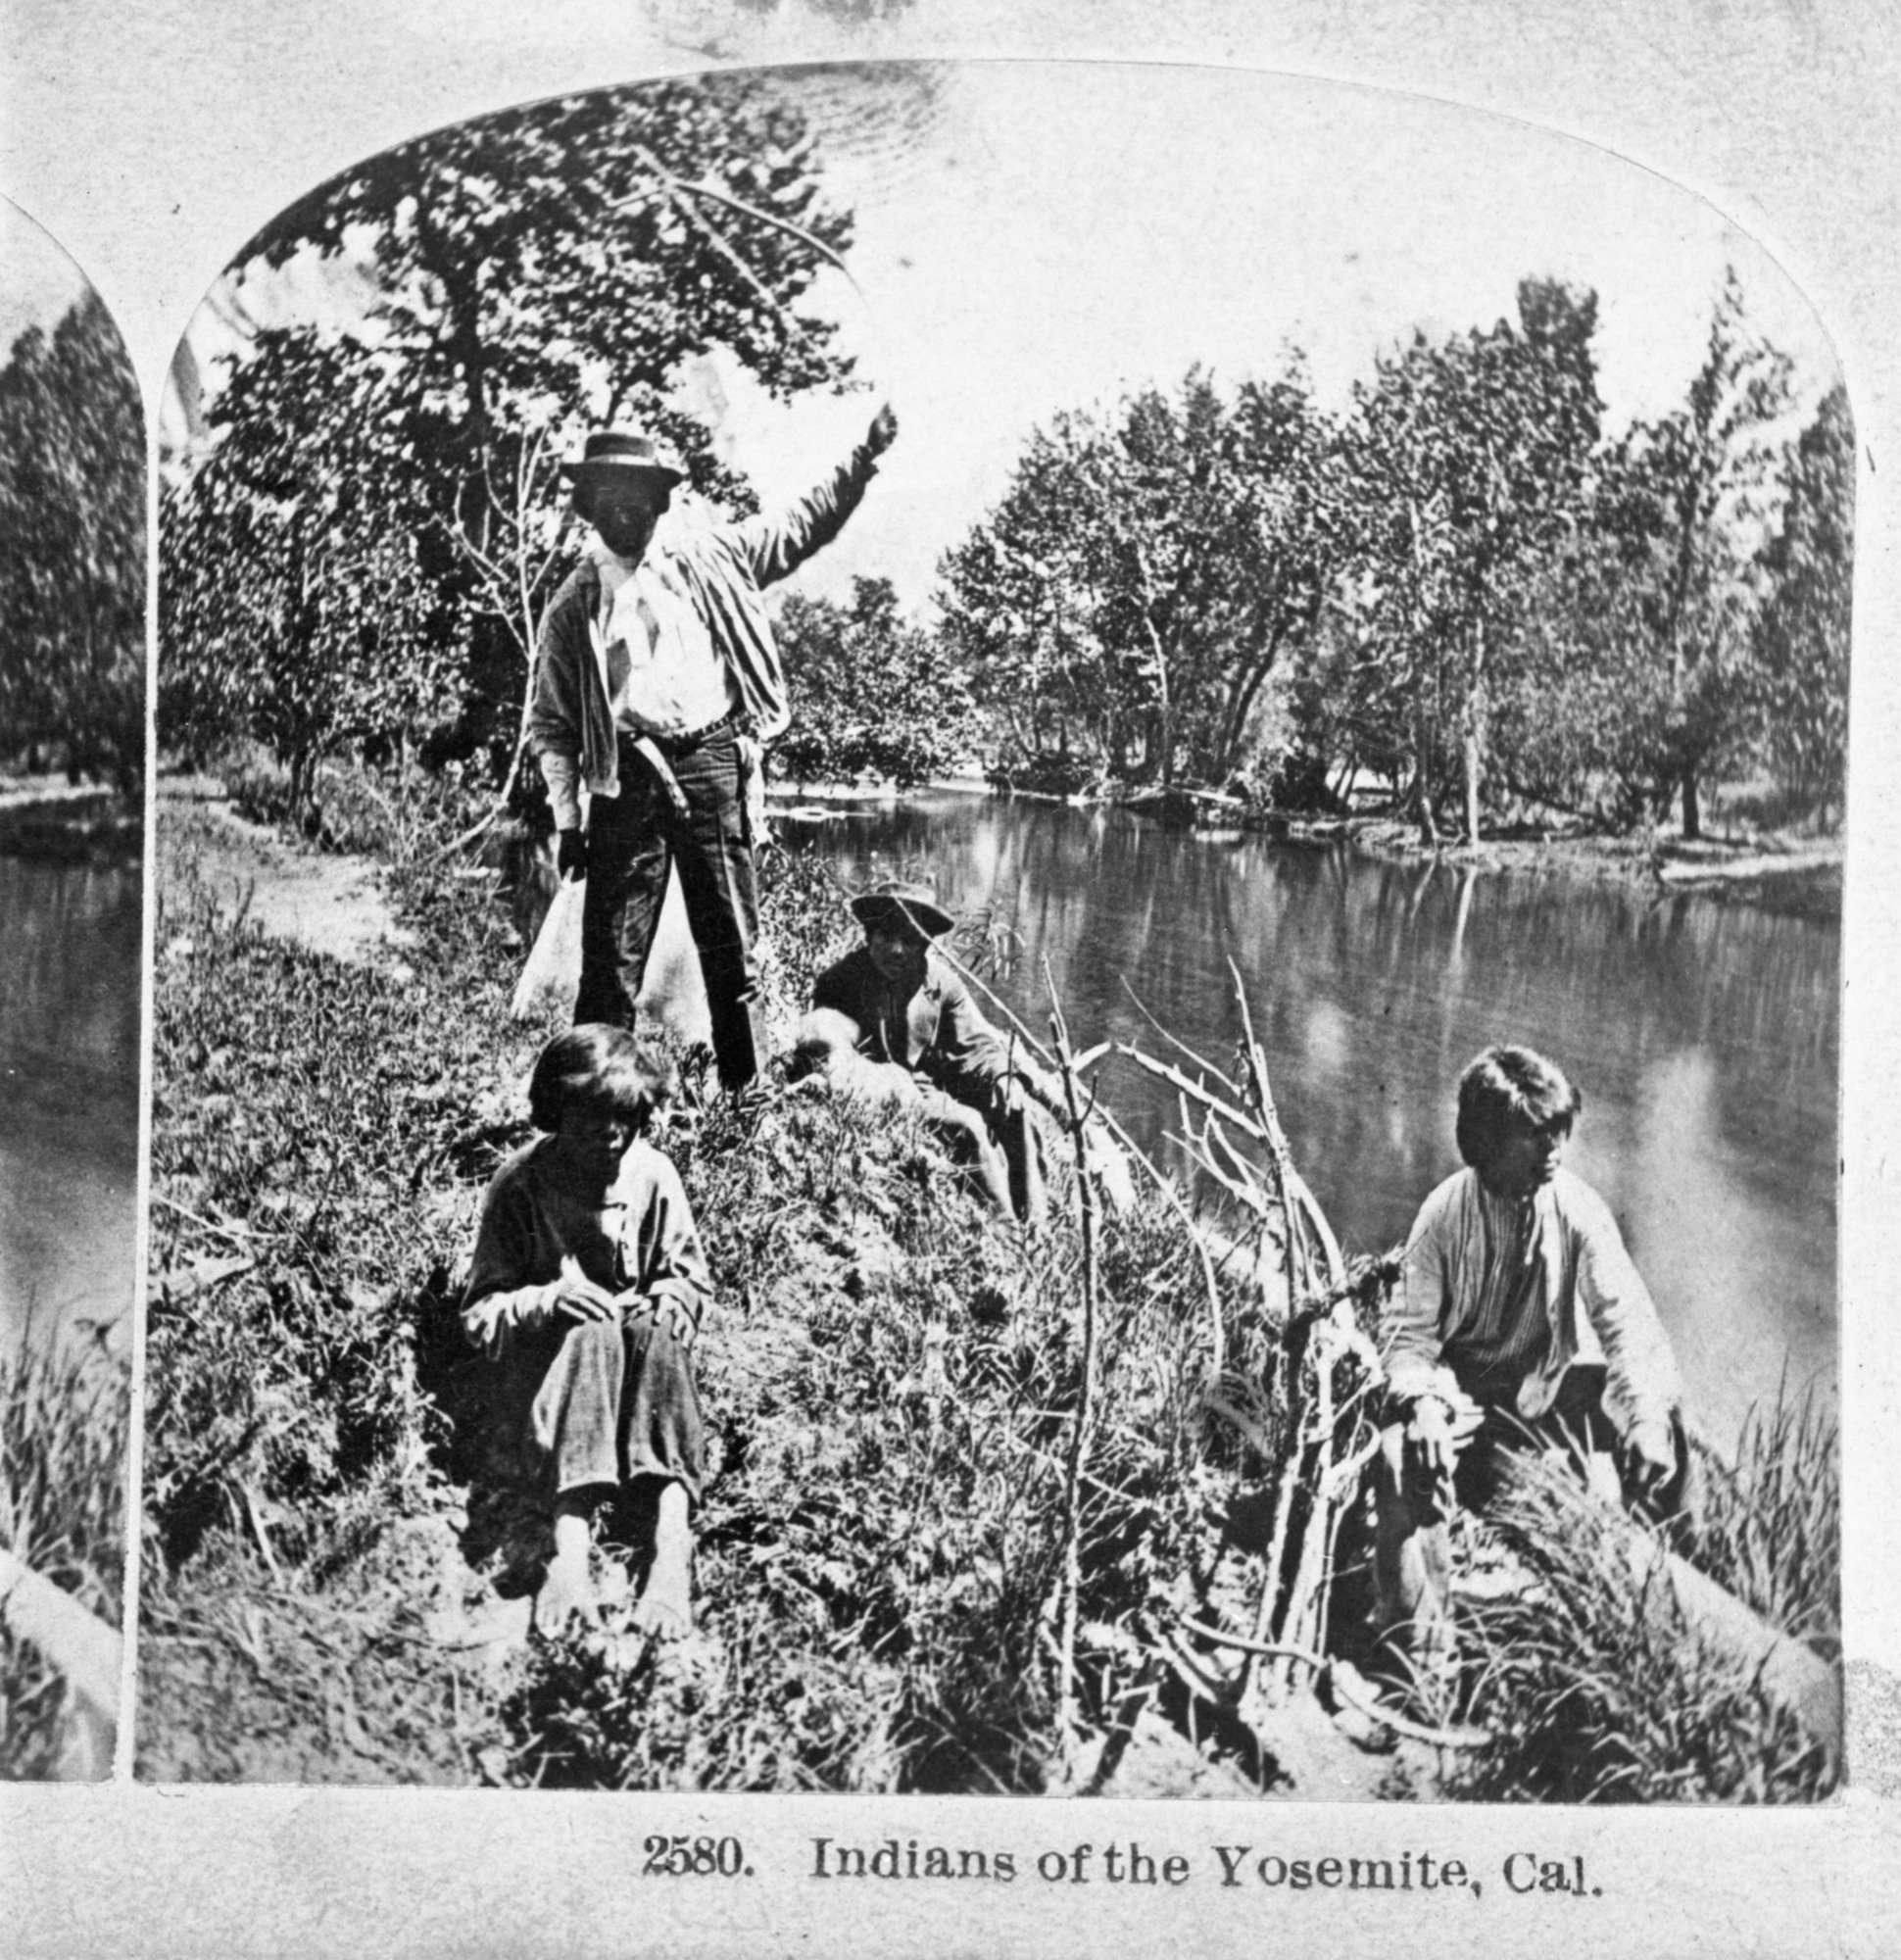 Copy Neg: 11/85 by M. Dixon. Detail of L. Smaus stereo (RL-16,577). Caption: "2580. Indians of the Yosemite, Cal."